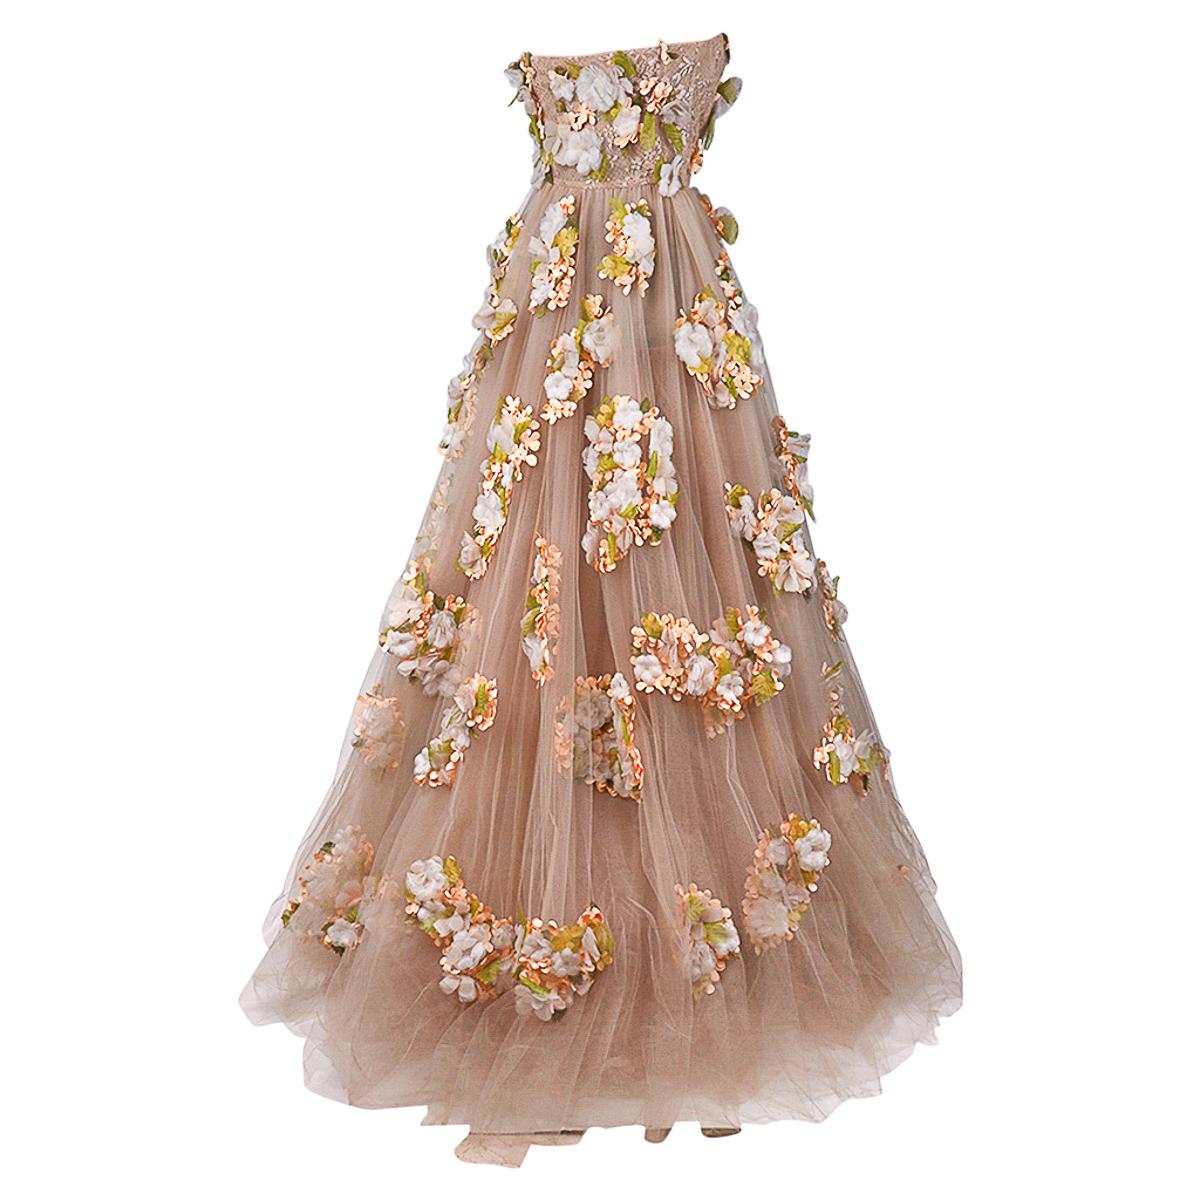 Valentino Strapless Empire Nude Flower Adorned Gown 1 of 2 Size 0 For Sale 3